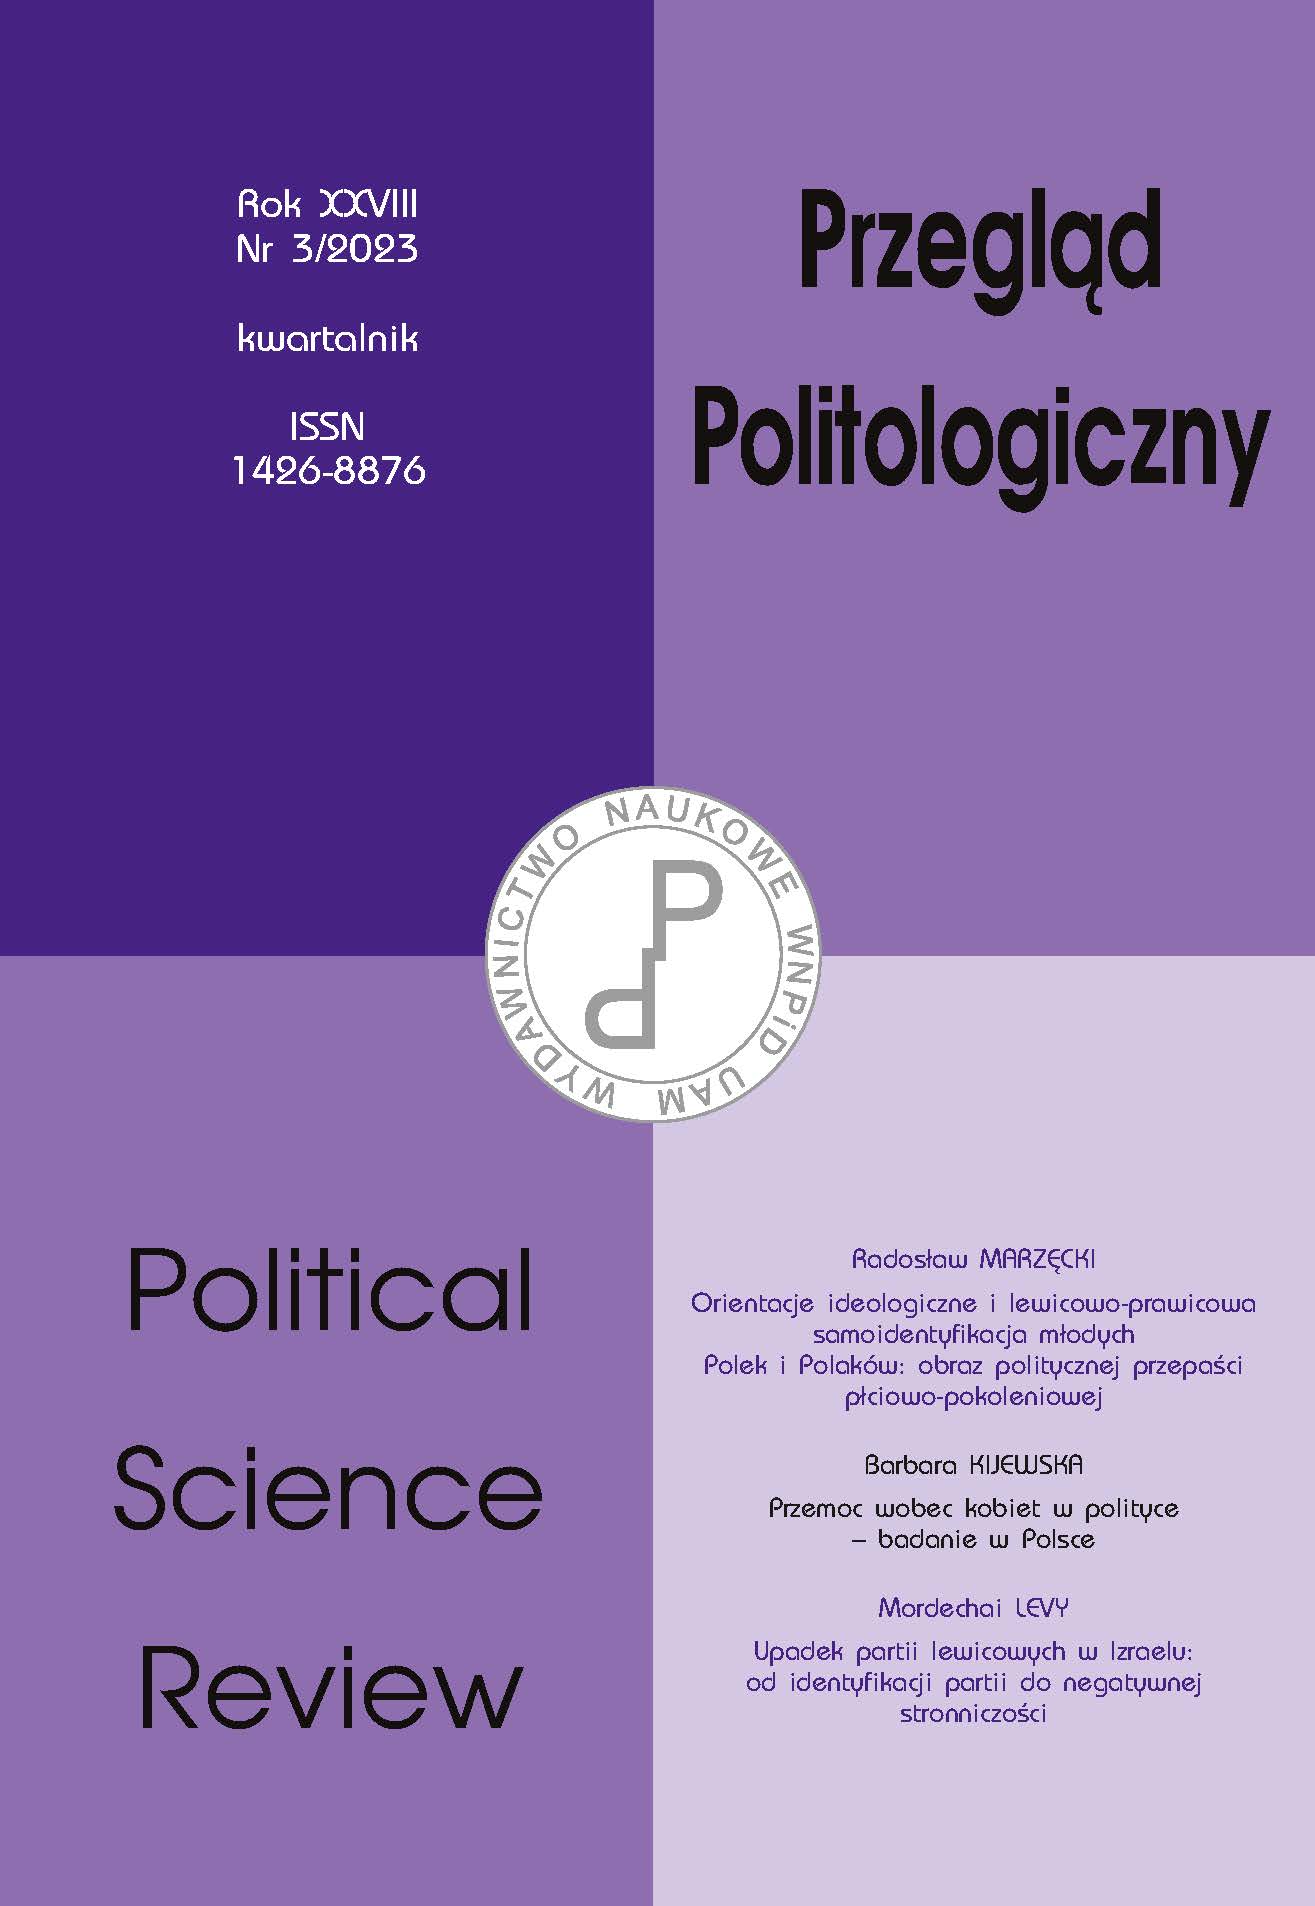 The analysis of voting preferences of West Pomerania inhabitants in the years 2001–2020